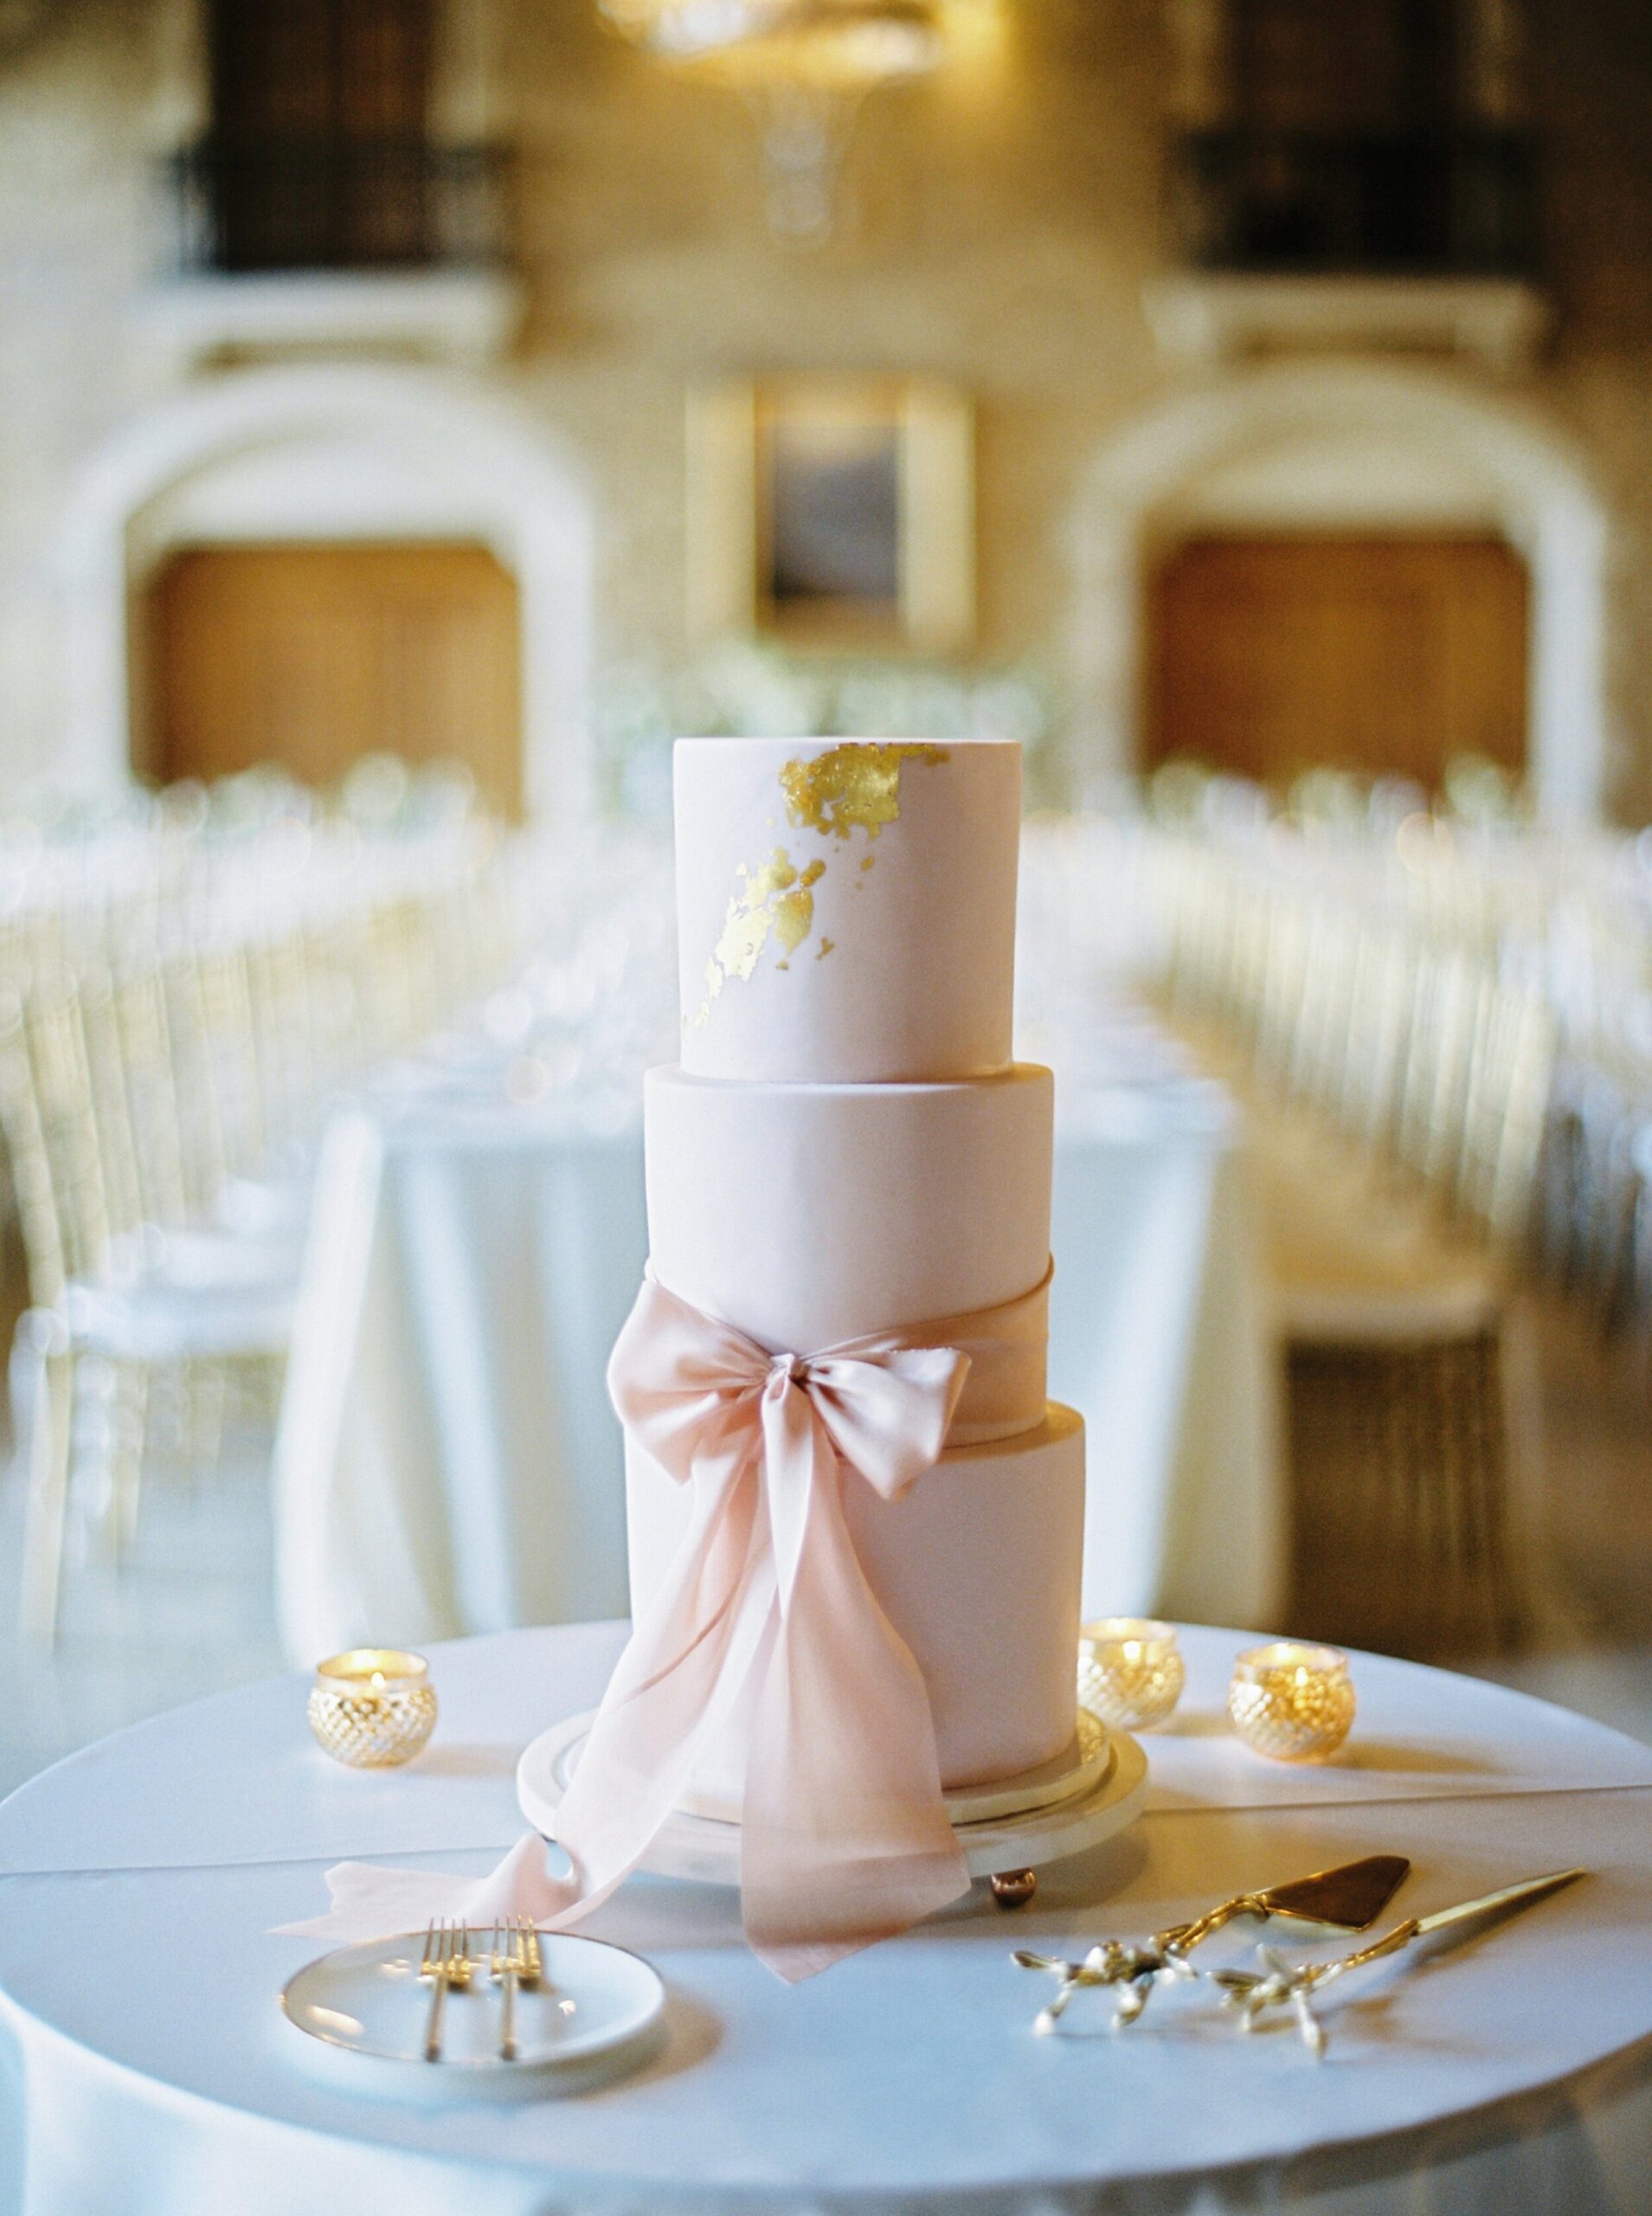  3 tiered pink and gold cake with giant bow | Fairmont Banff Springs hotel wedding photographers | fine art film photography | portra 400 